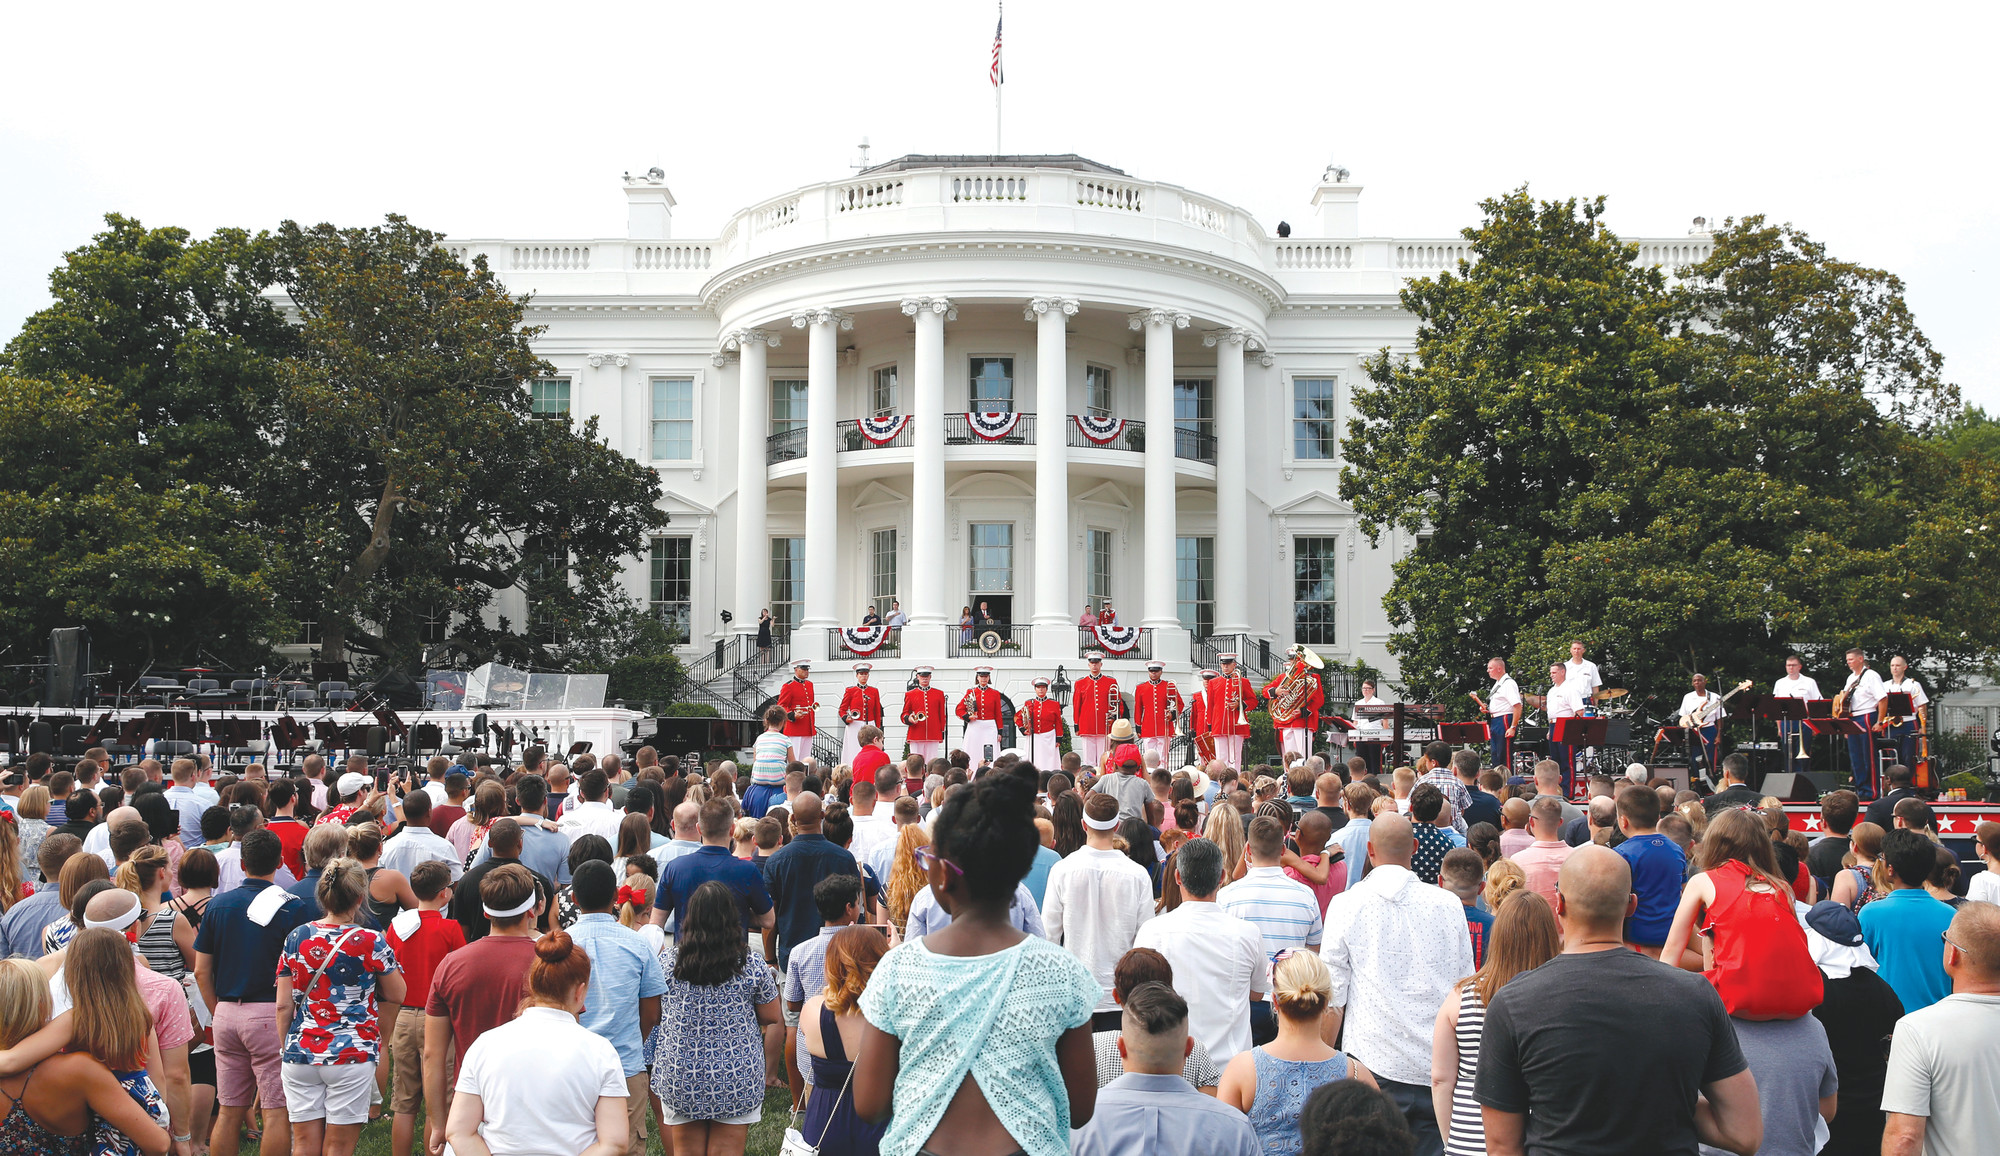 Visitors gather at the White House for the playing of the national anthem during an afternoon picnic for military families on the South Lawn of the White House on July 4 in Washington.